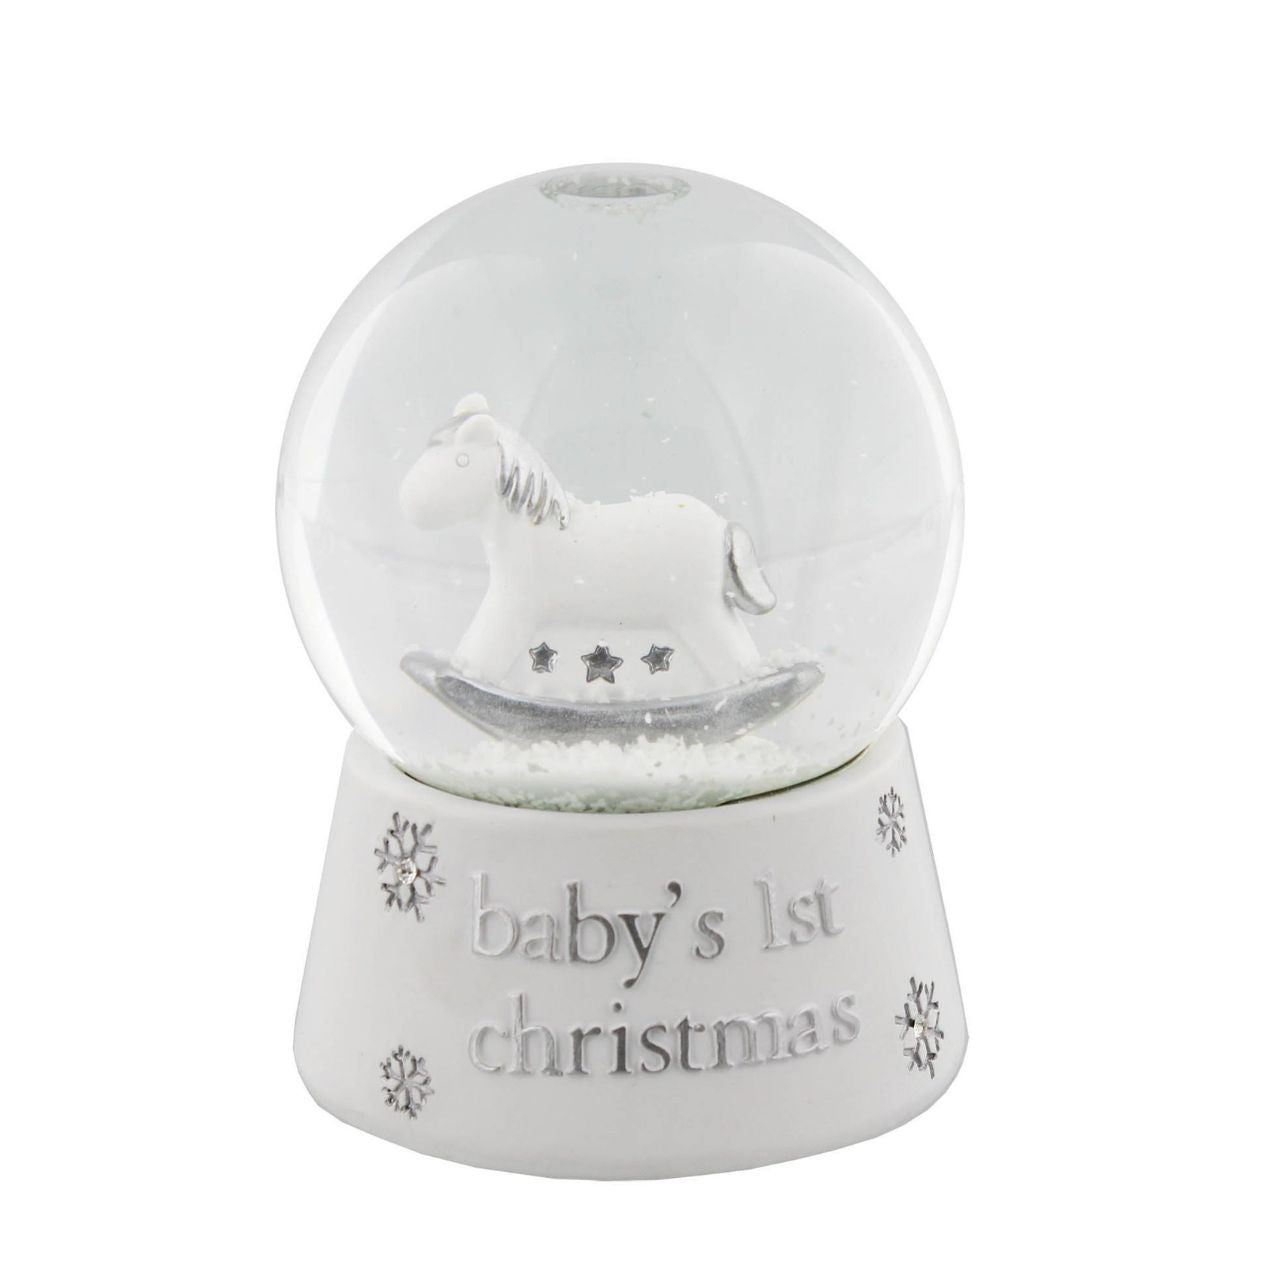 Snowglobe Bambino Baby's 1st Christmas  A Baby’s 1st Christmas water ball.  This smile-raising decoration is a lovingly designed decoration for celebrating the first Christmas of little ones.